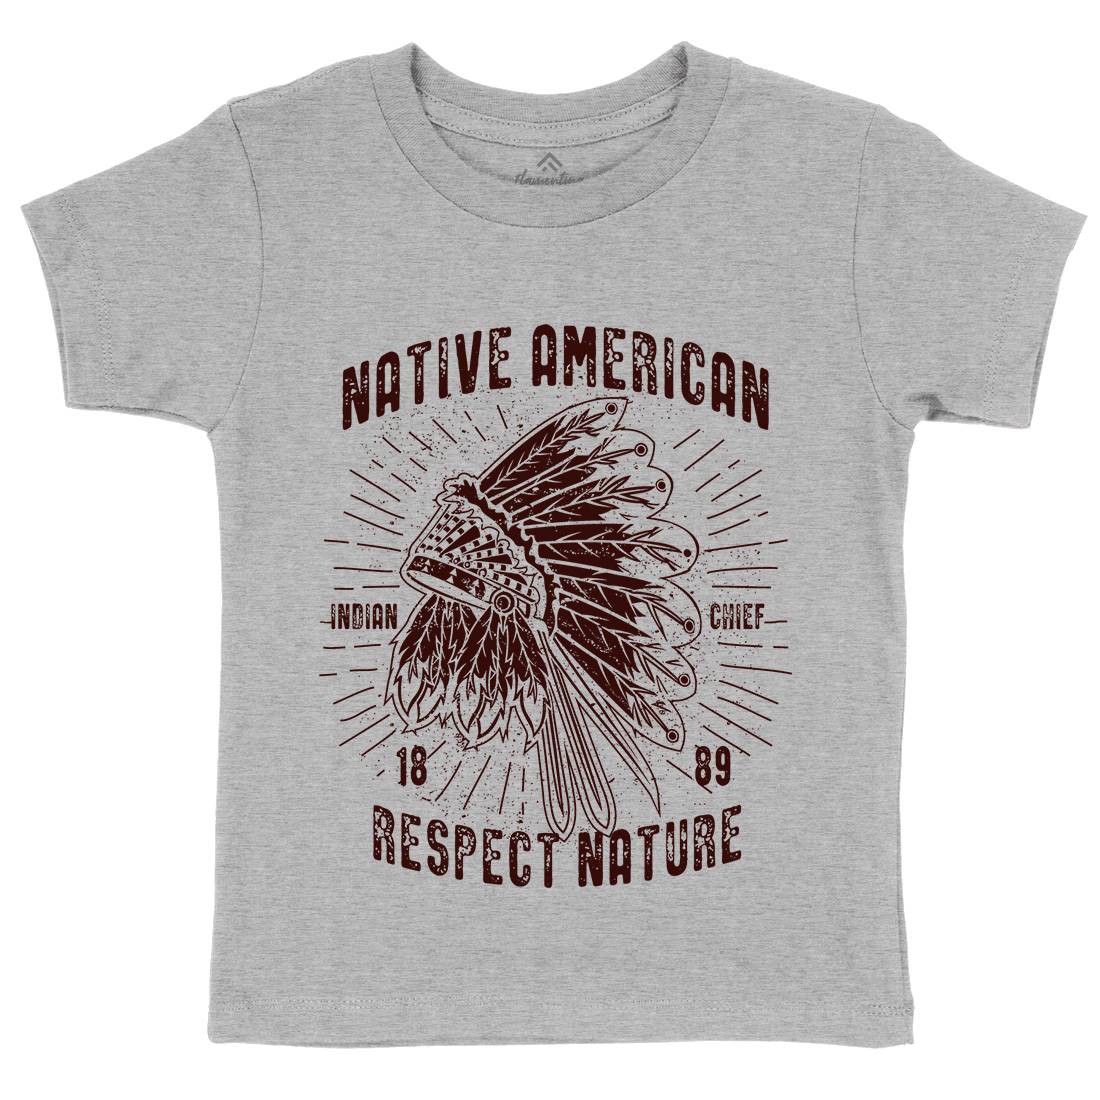 Native American Kids Crew Neck T-Shirt Motorcycles A093